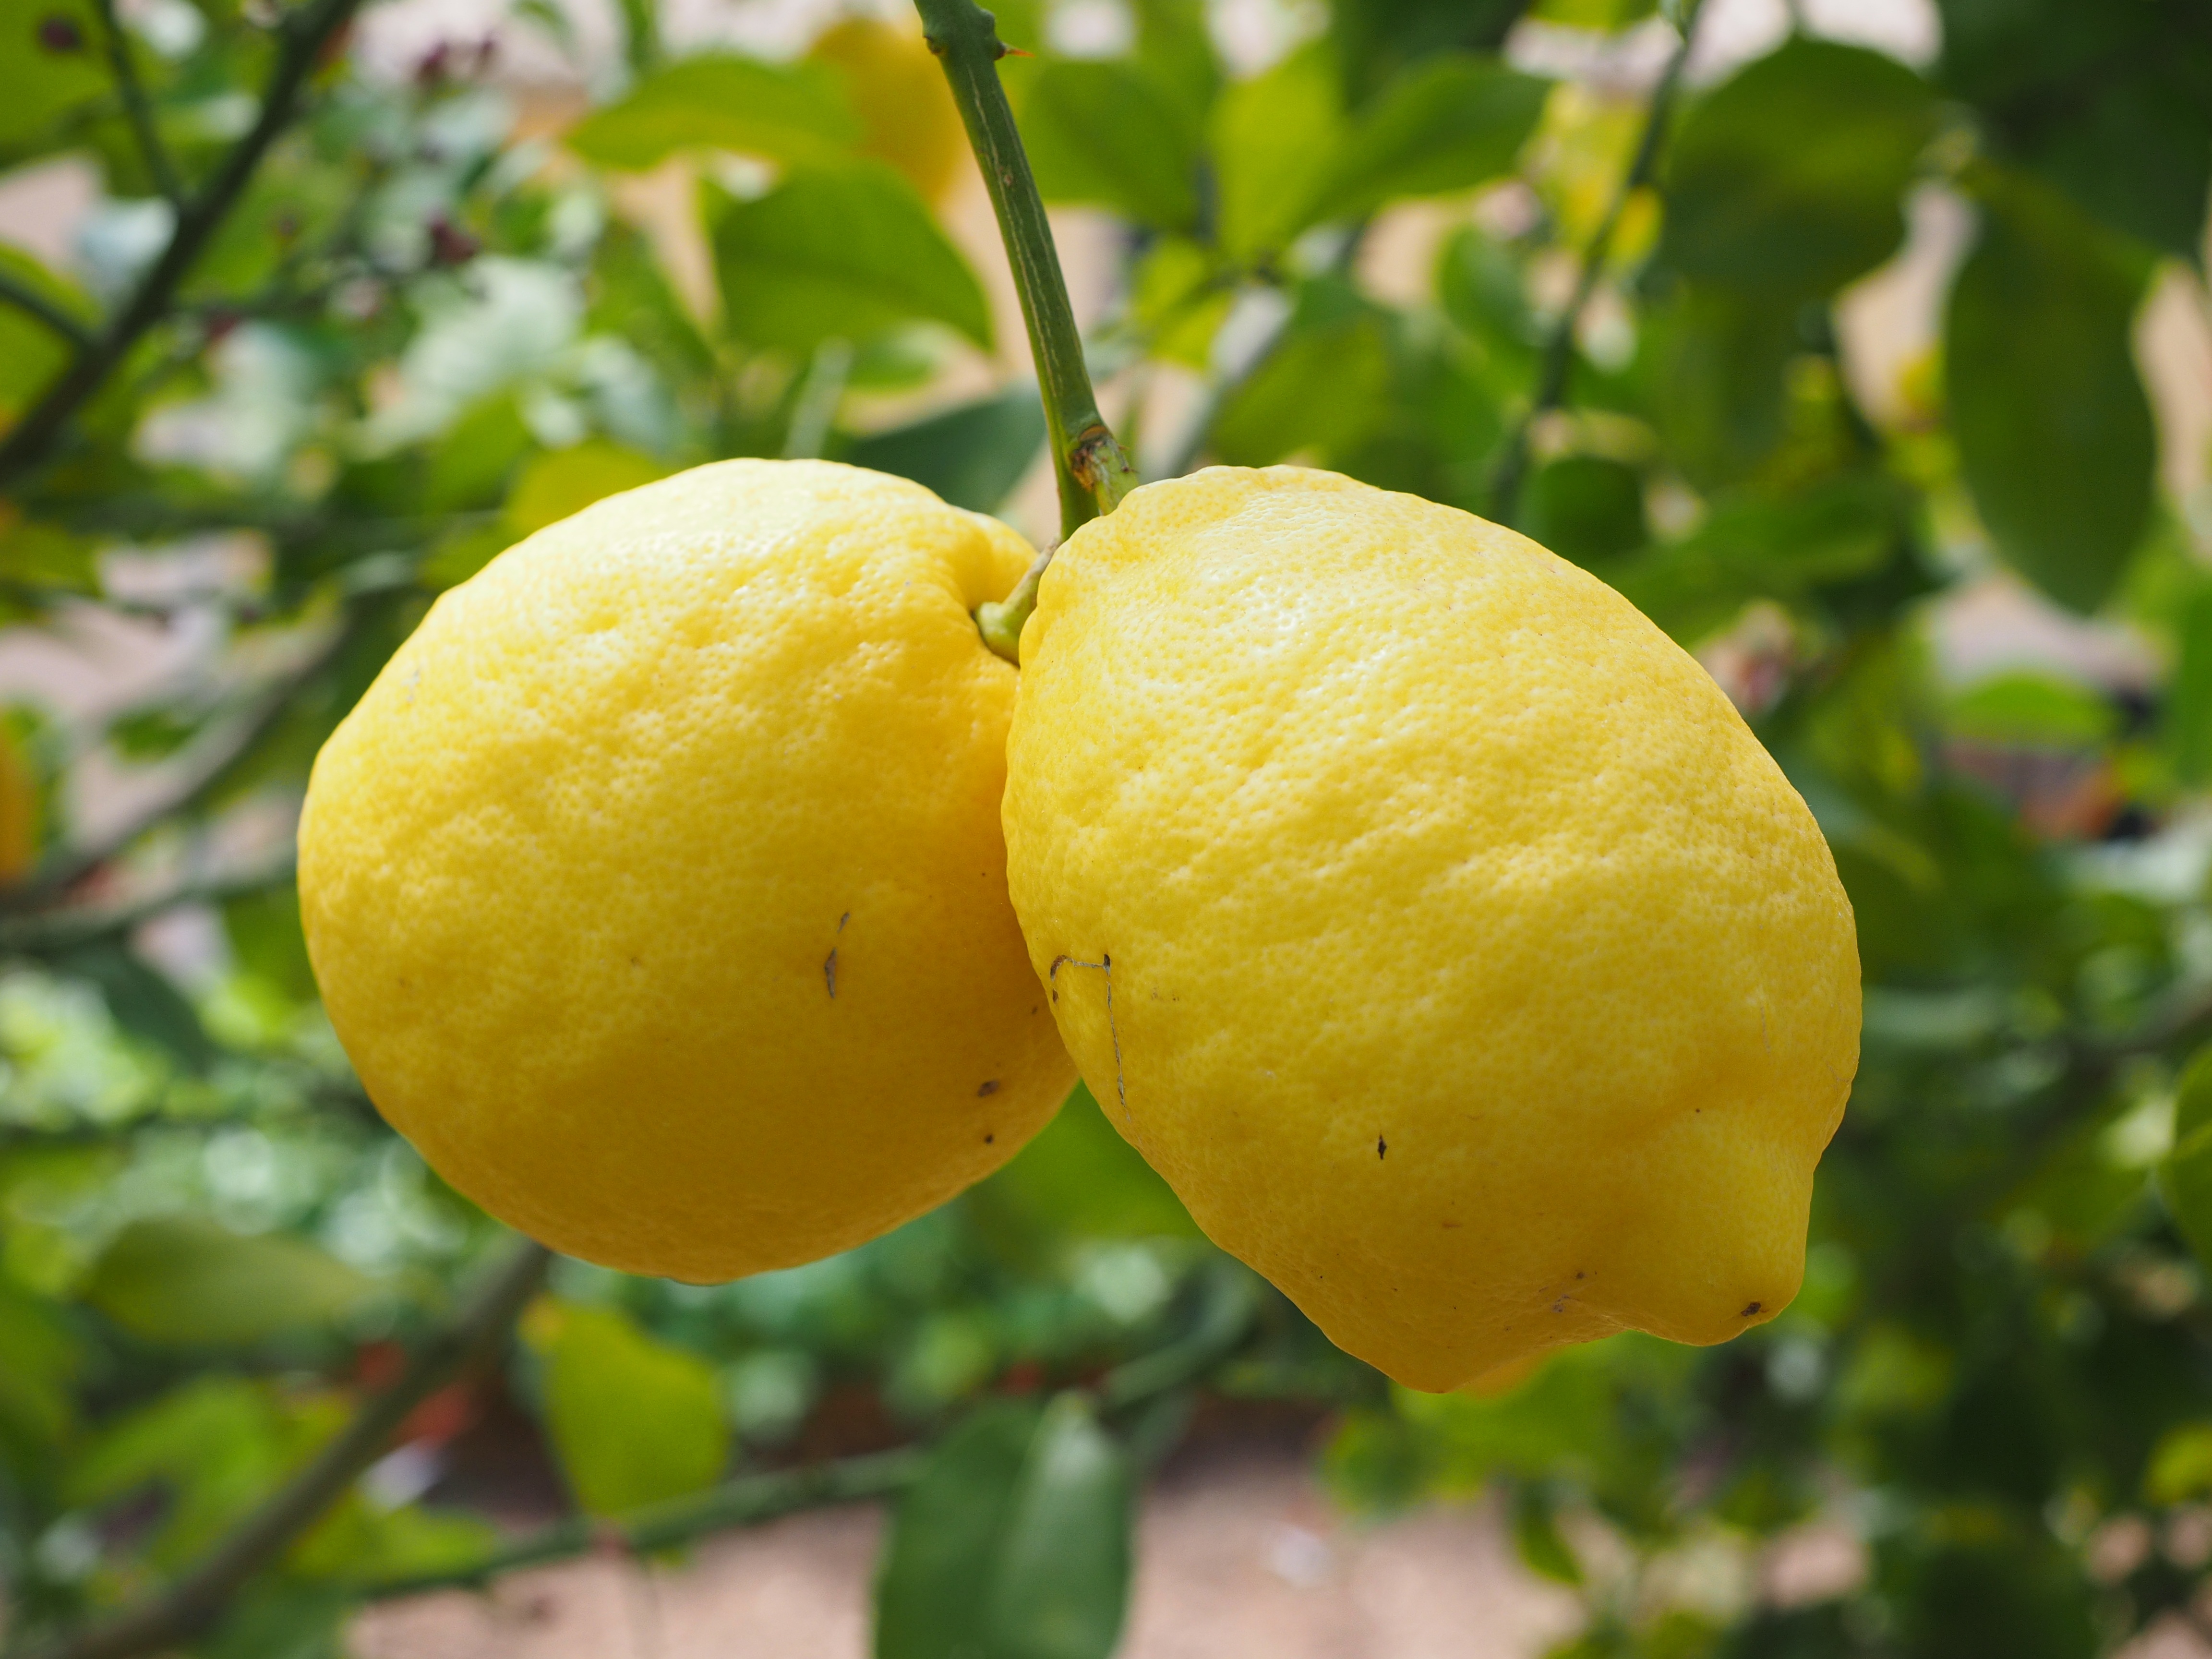 83702 download wallpaper food, lemons, branch, fruit, citrus screensavers and pictures for free